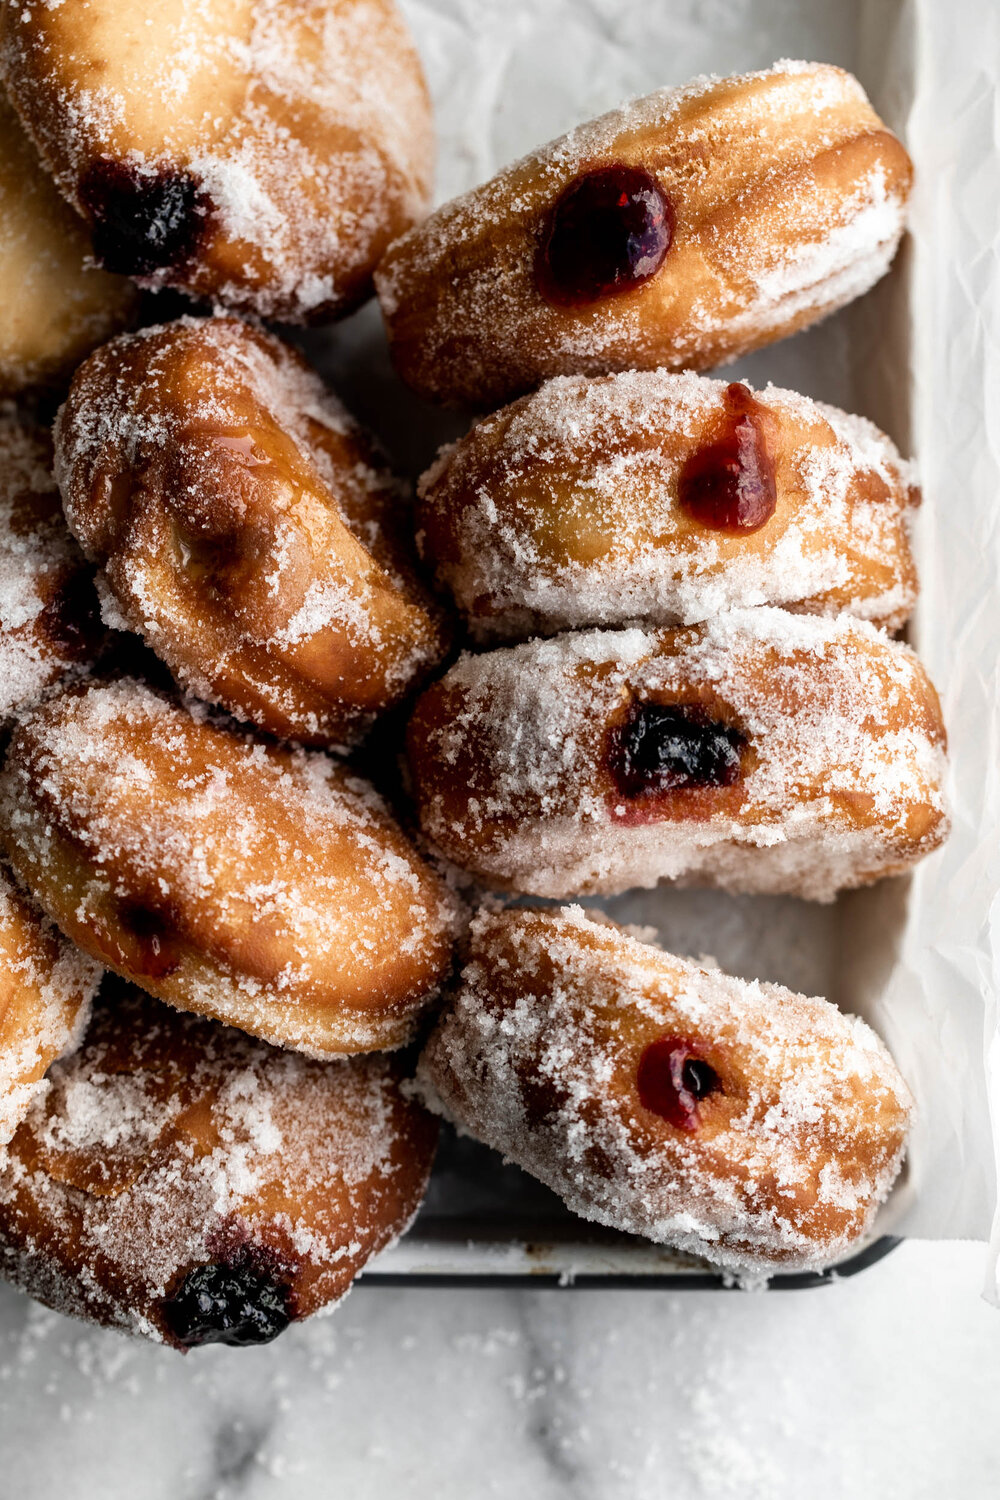 Make your favorite jelly doughnuts at home. Sweet yeast doughnut dough fried and filled with your favorite jelly and jams. 